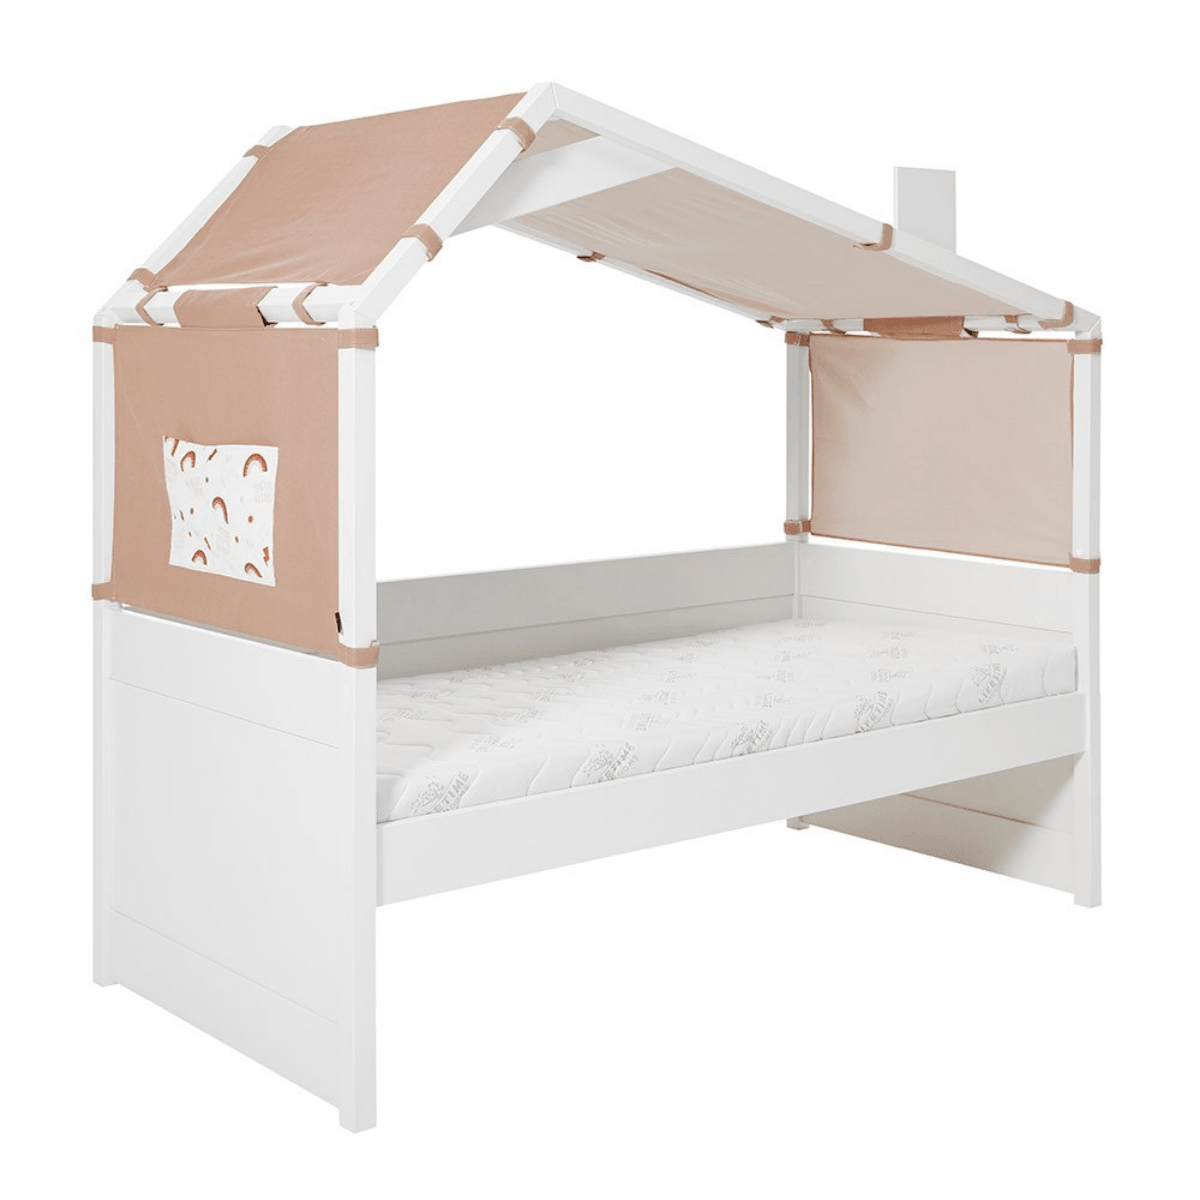 FREE Installation - LIFETIME Kidsrooms Cool Kids Hut Day Bed - Little Snoozes